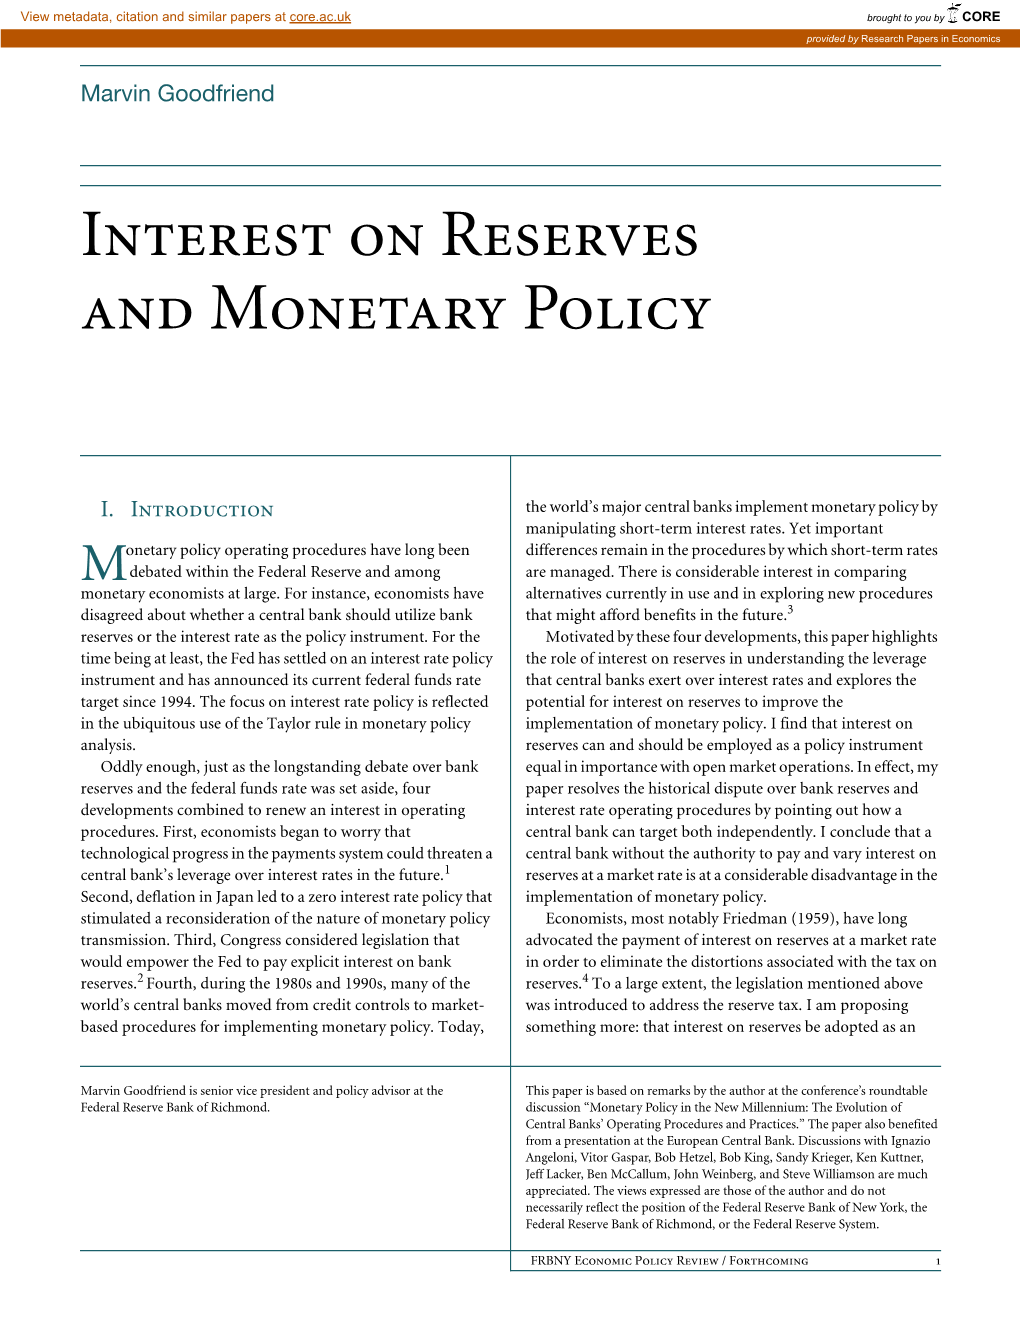 Interest on Reserves and Monetary Policy